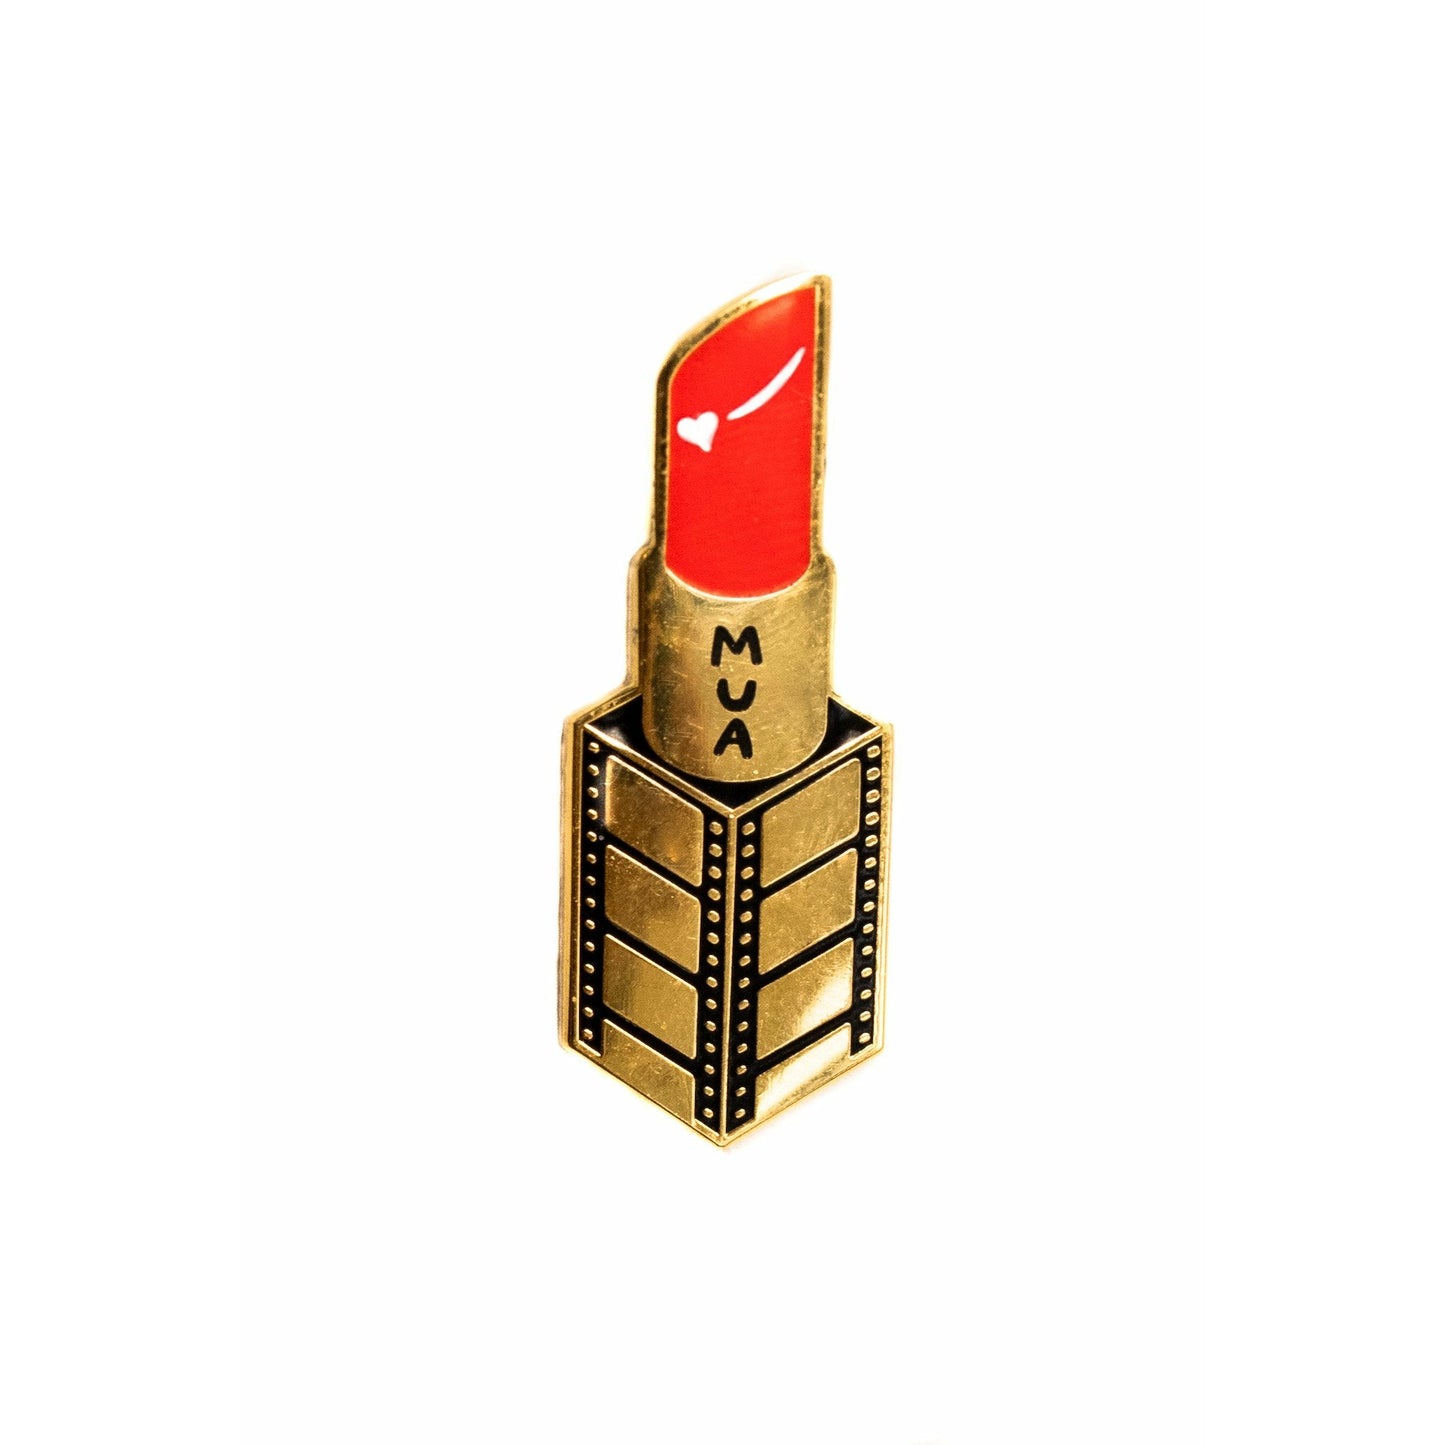 Red and gold lipstick enamel pin with text MUA